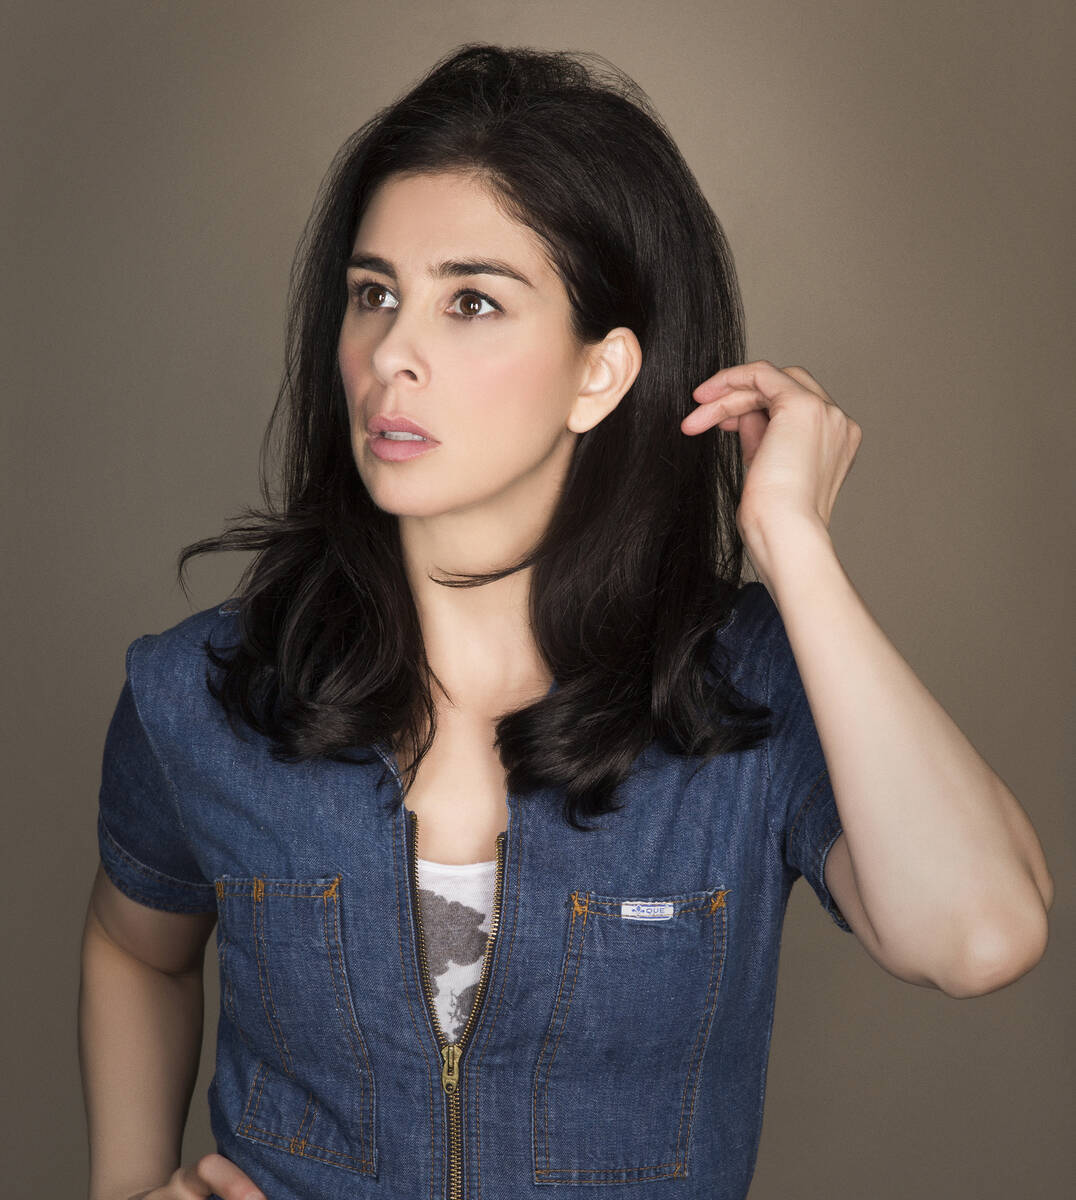 Top stand-up comic and actress Sarah Silverman headlines Encore Theater at Wynn Las Vegas on Su ...